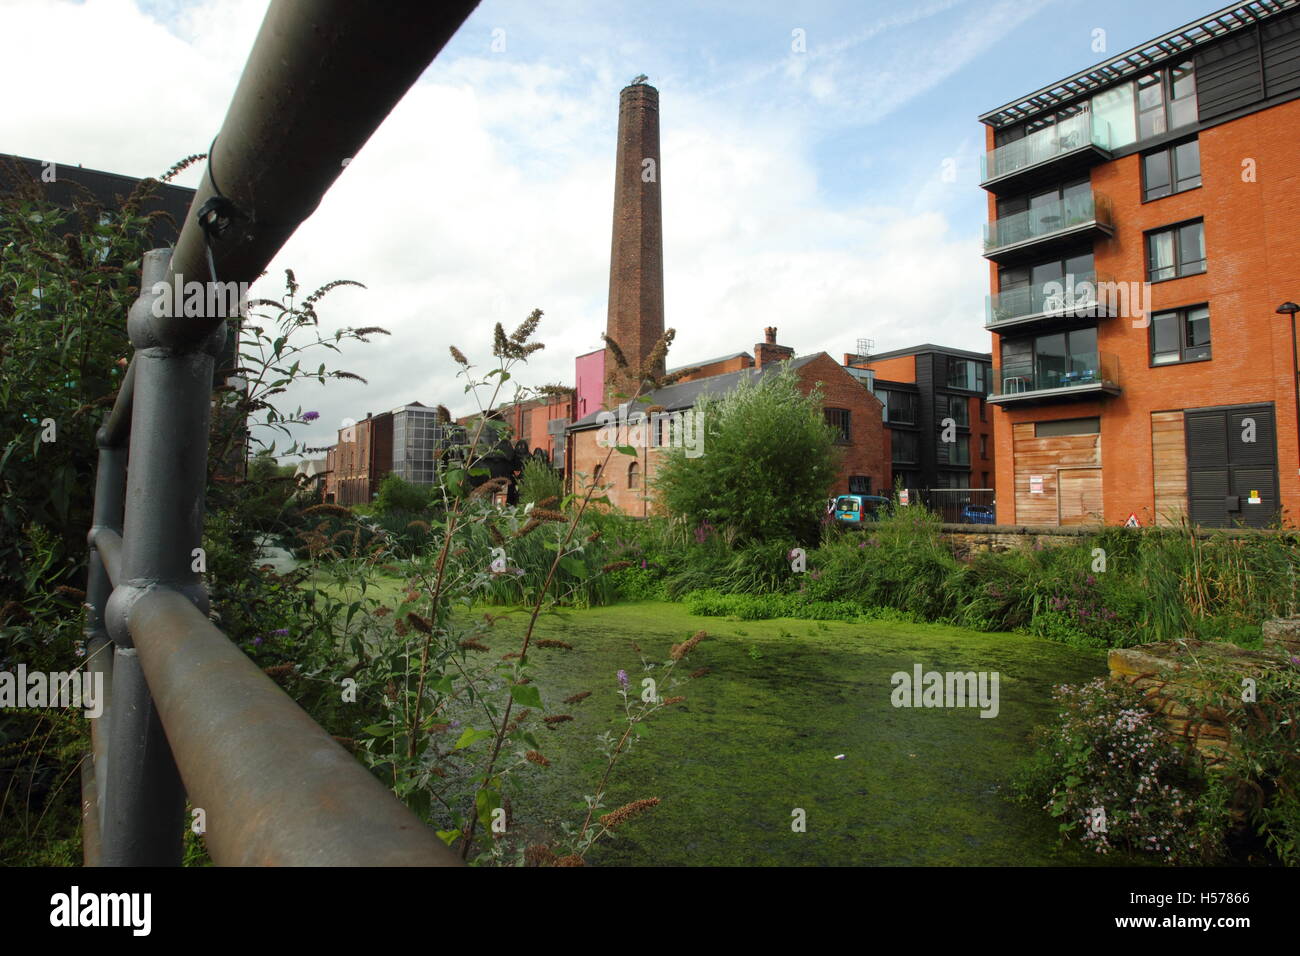 The River Don flowing through Kelham Island; a heavily urbanised, former industrial district of the city of Sheffield, UK - 2016 Stock Photo